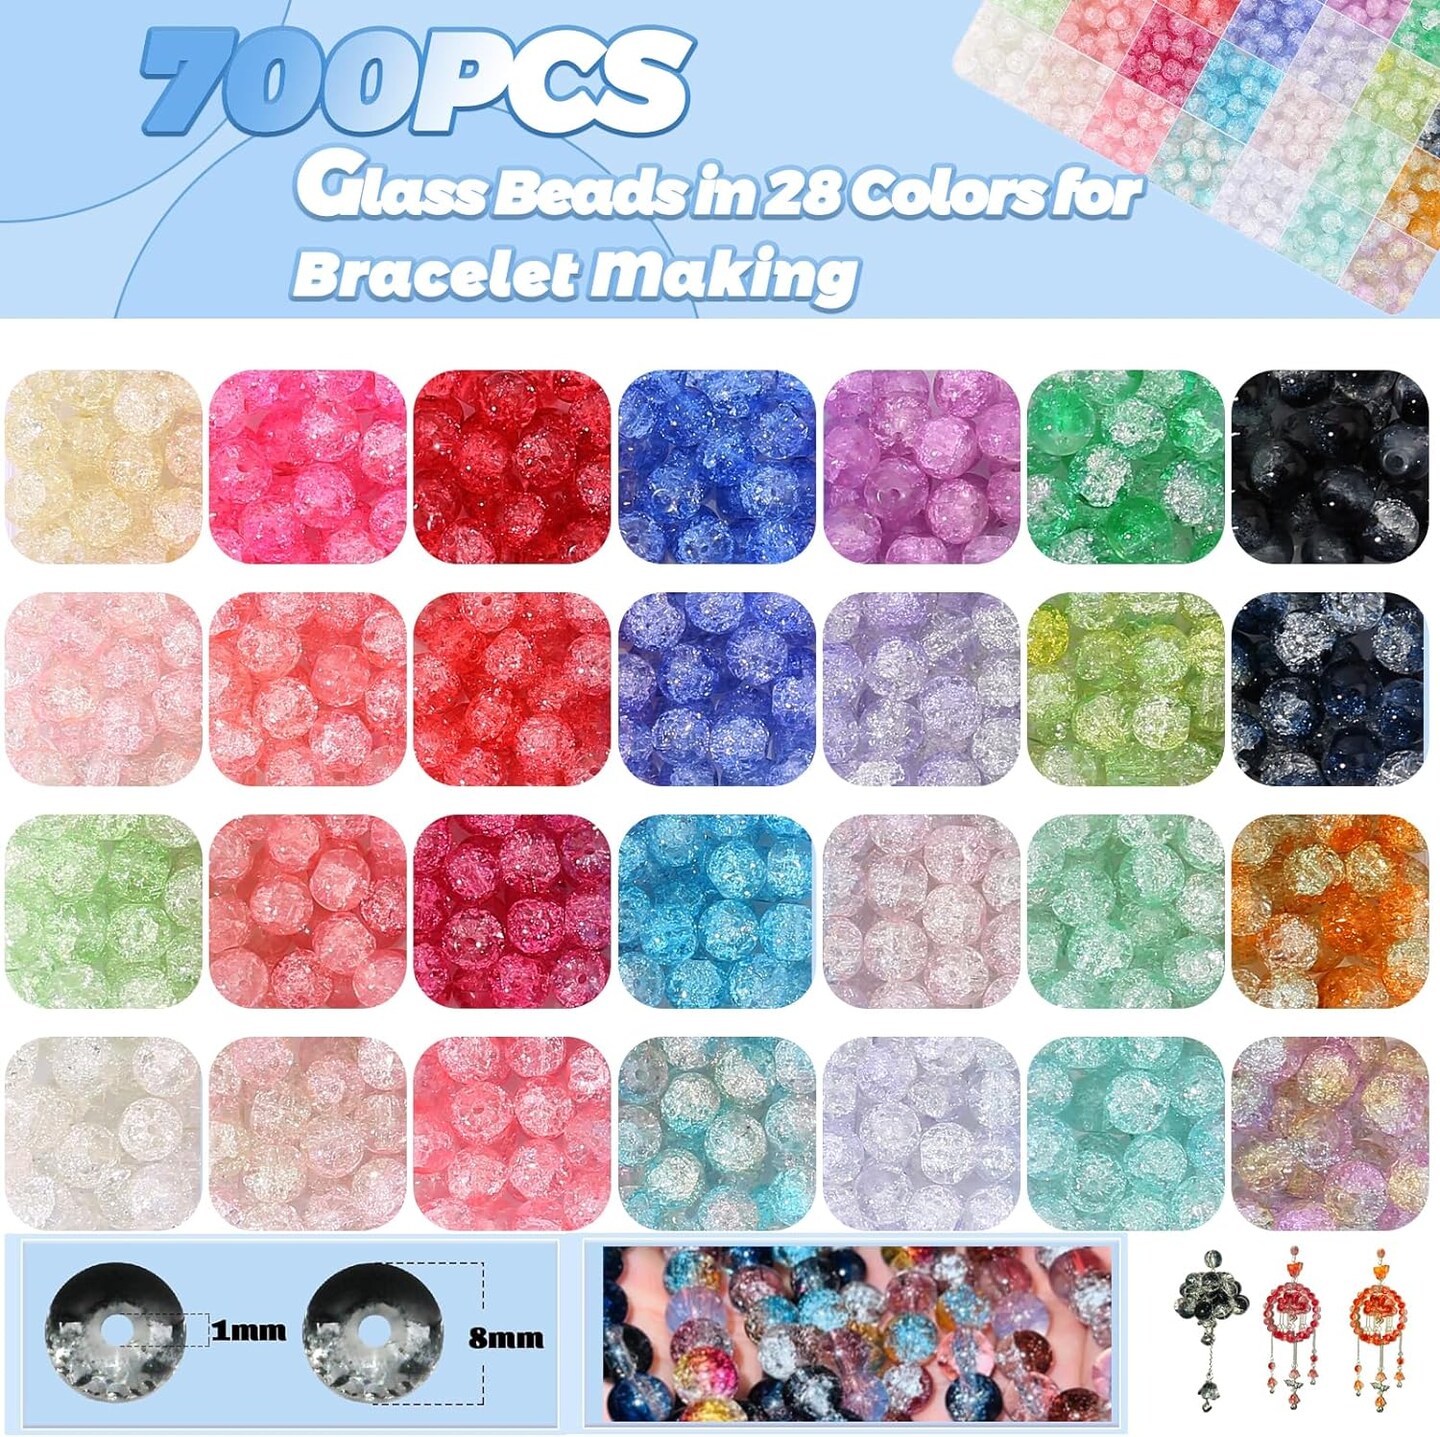 700pcs Crack Glass Beads for Jewelry Making -8MM Beads Bracelet Making Kit with Crystals, Charms, and Friendship Bracelet Beads - Jewelry Making Supplies for Adults and Girls